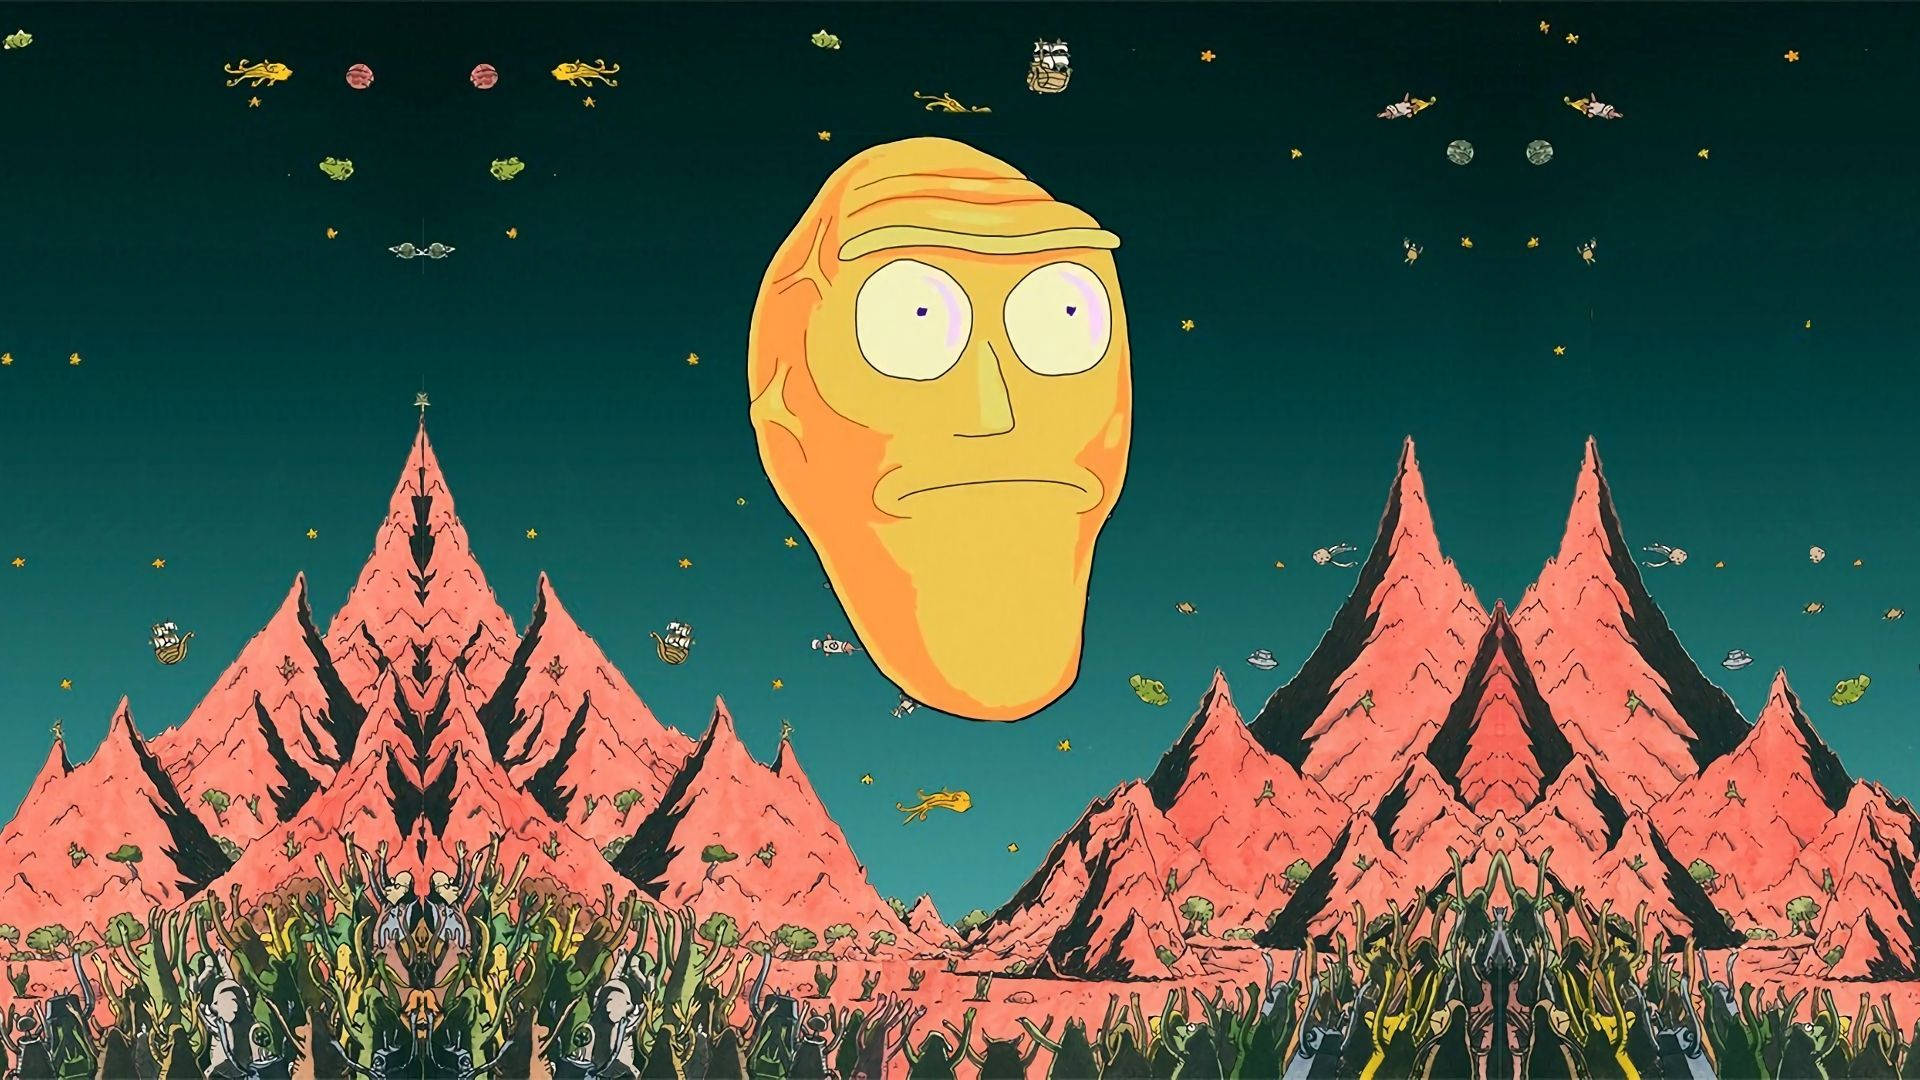 Giant Rick towers over Morty in this surreal Rick and Morty wallpaper. Wallpaper